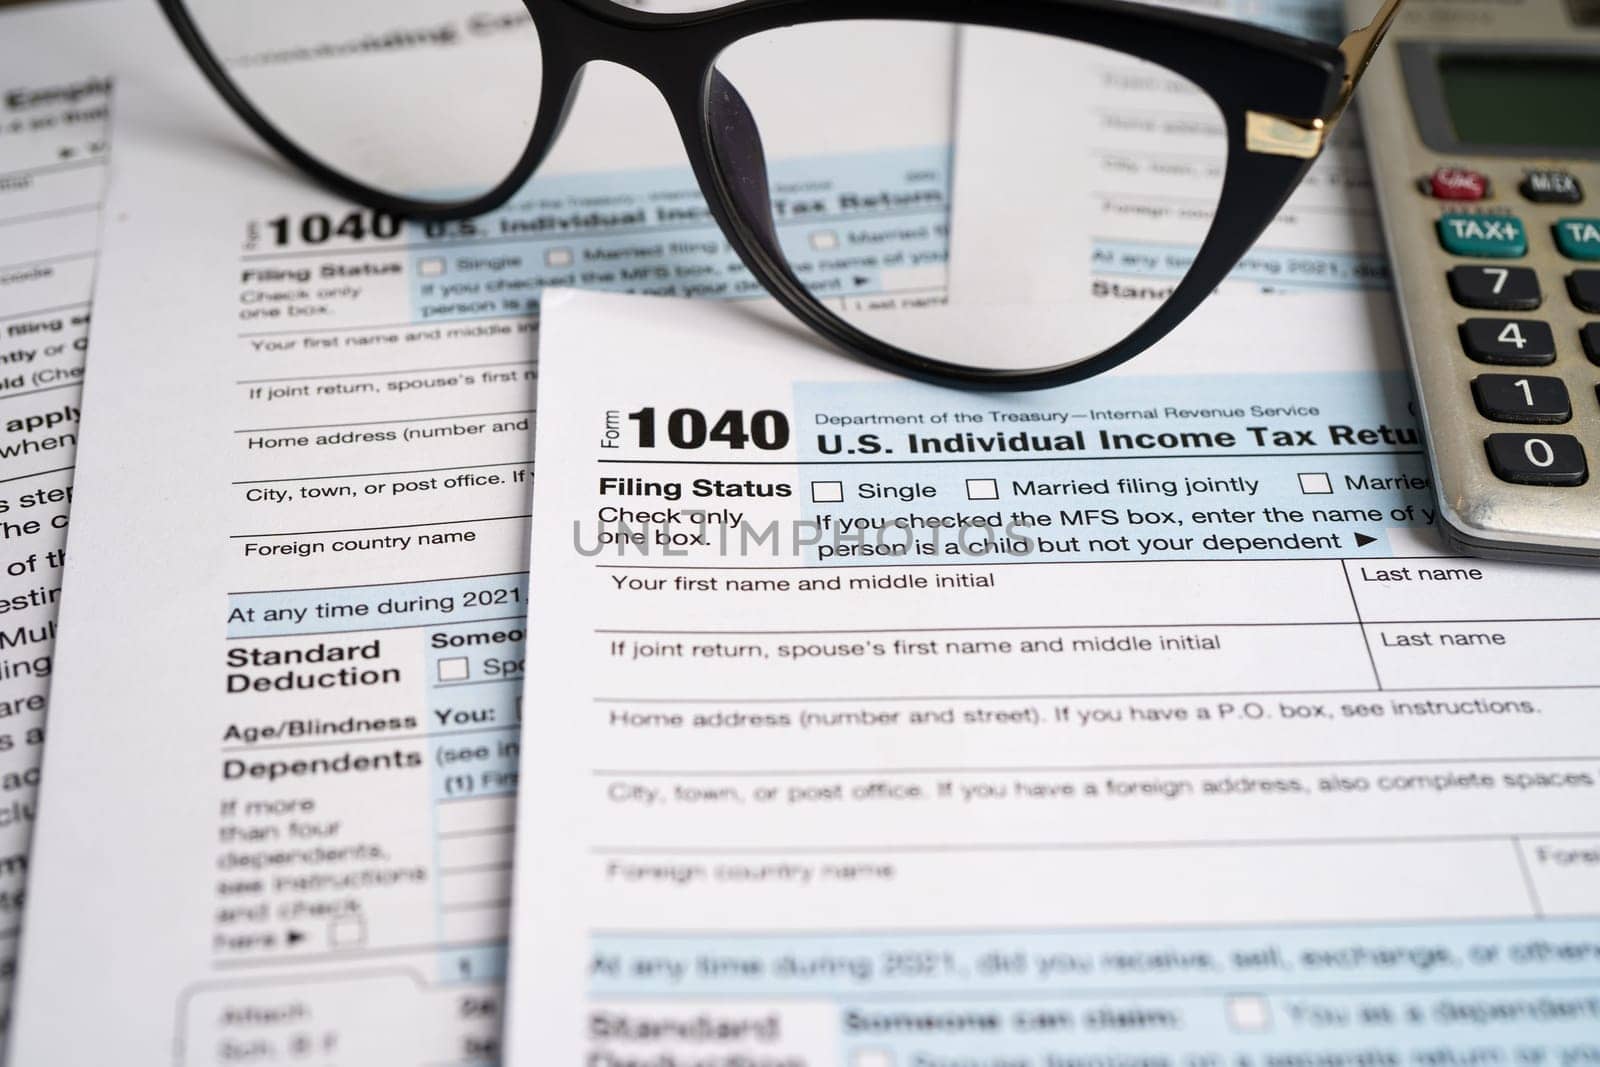 Form 1040, U.S. Individual Income Tax Return, tax forms in the U.S. tax system. by pamai